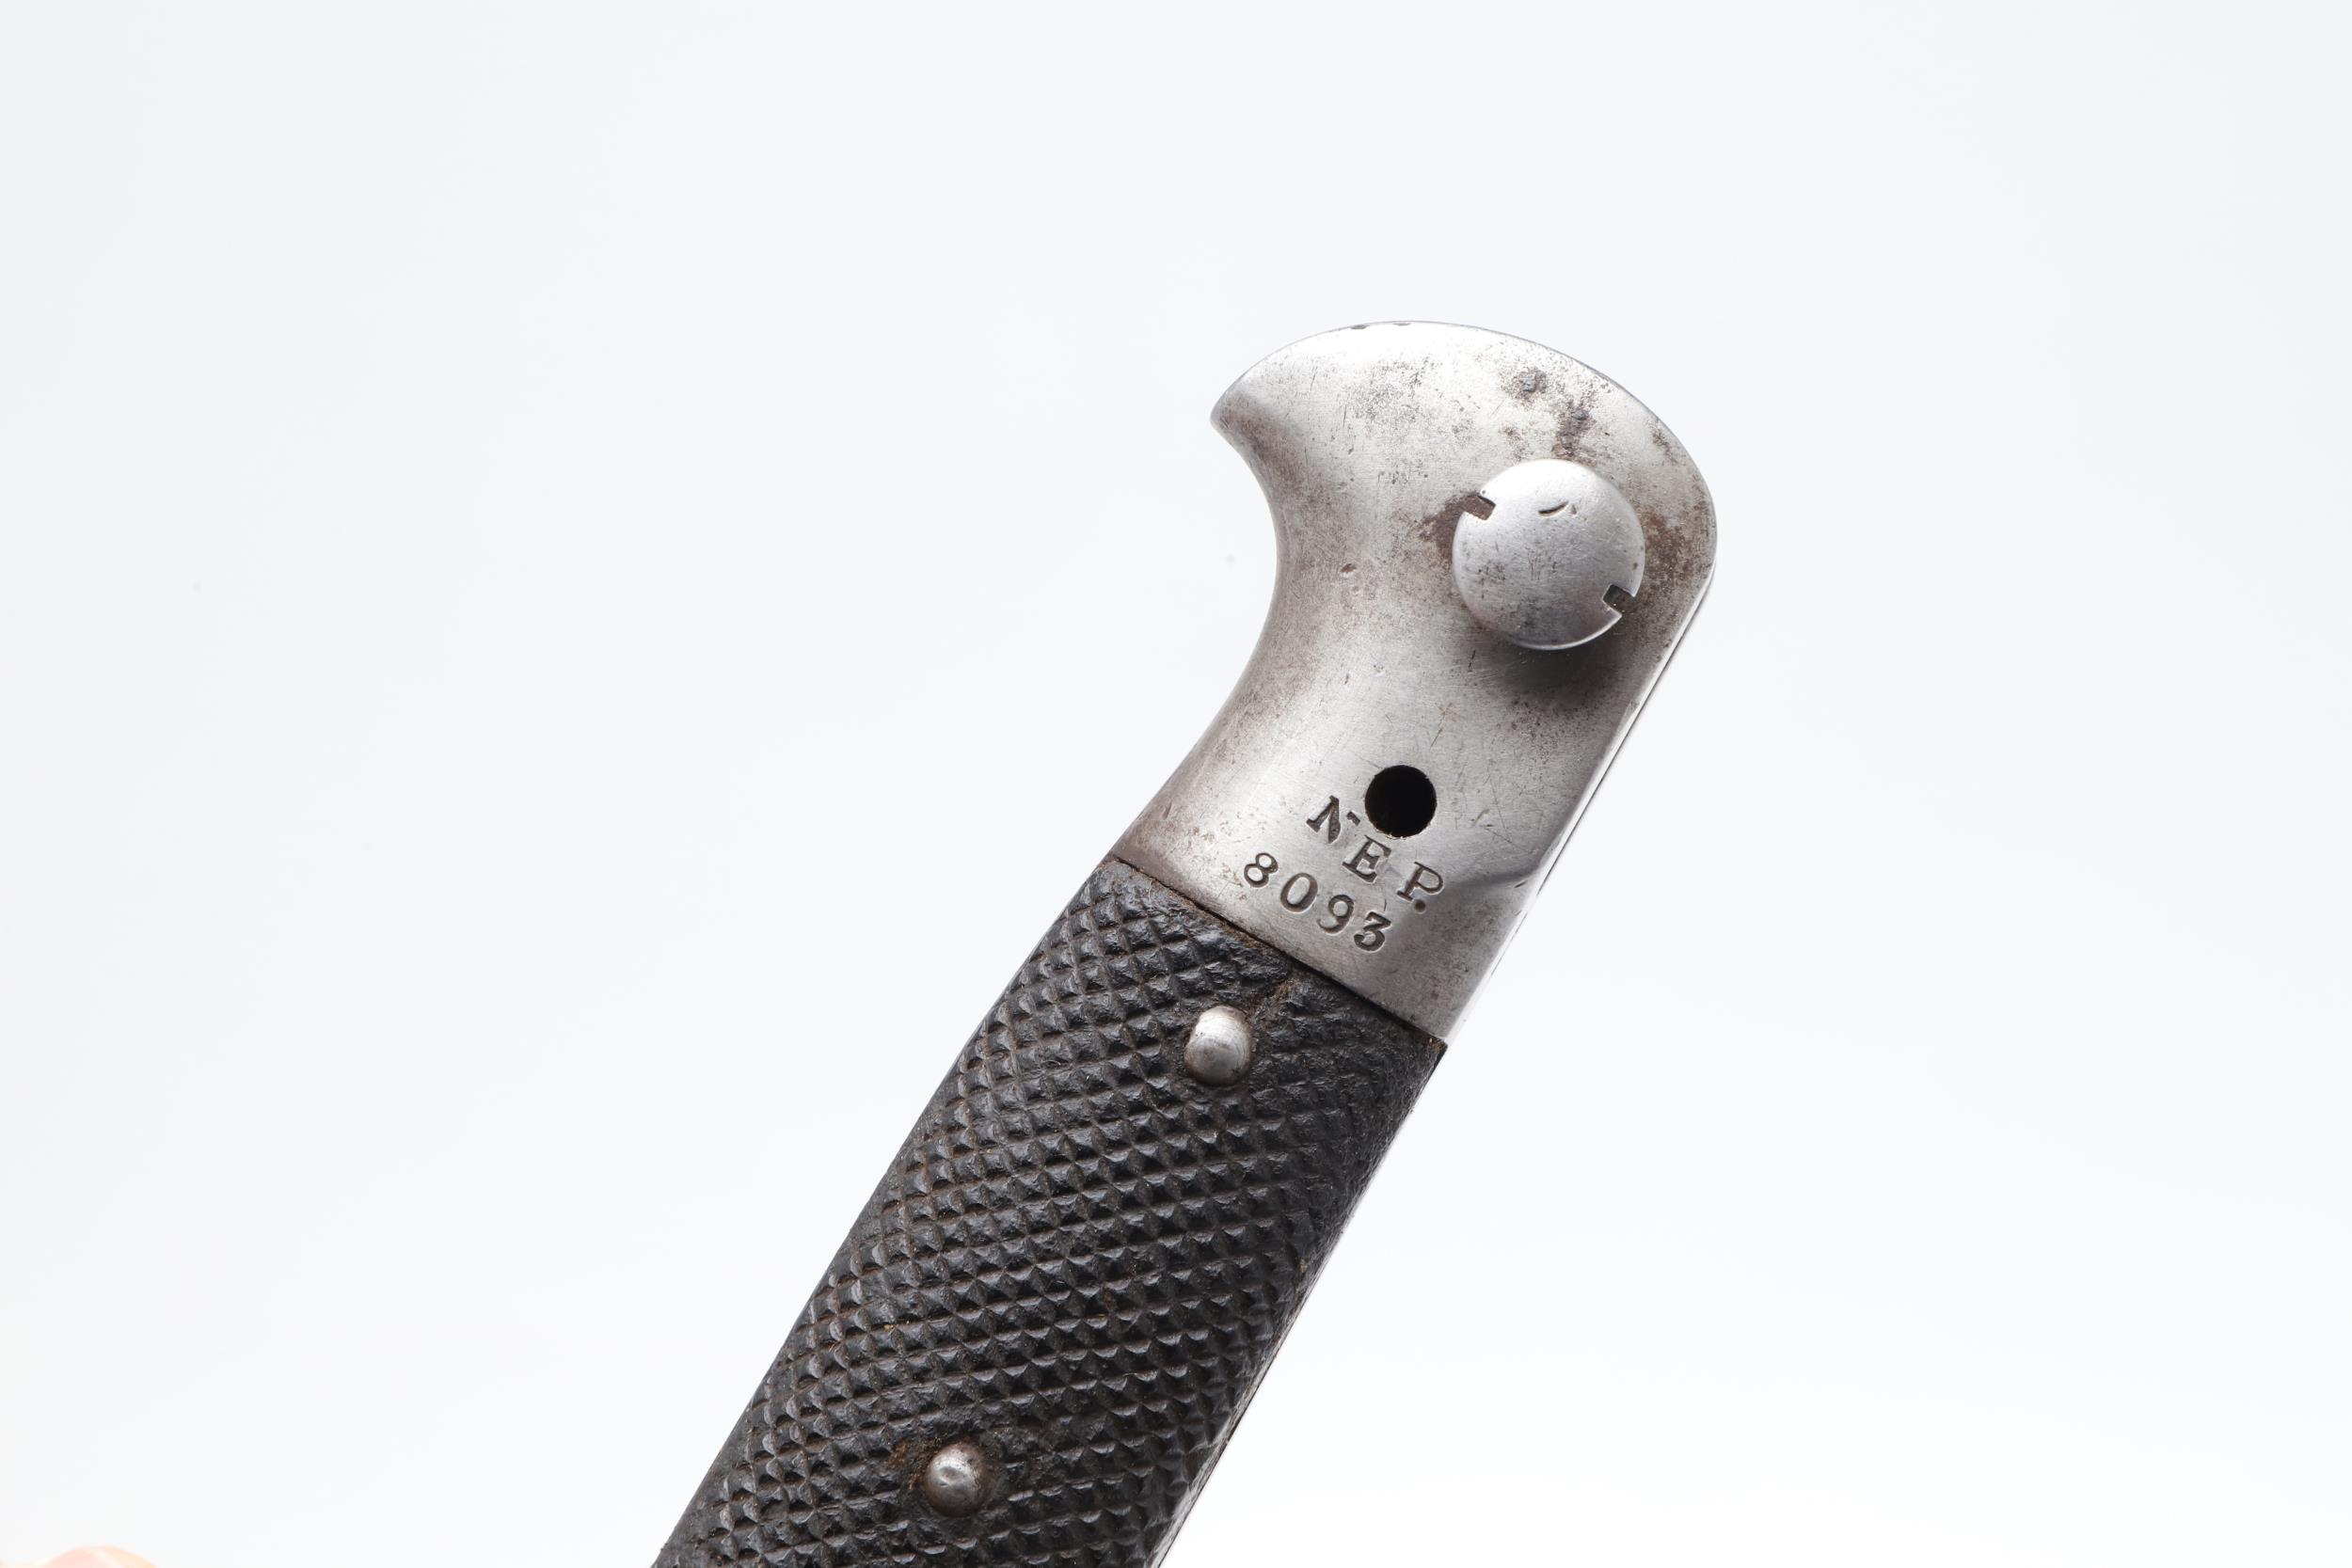 A VICTORIAN MARTINI HENRY 1887 PATTERN BAYONET AND SCABBARD. - Image 15 of 18